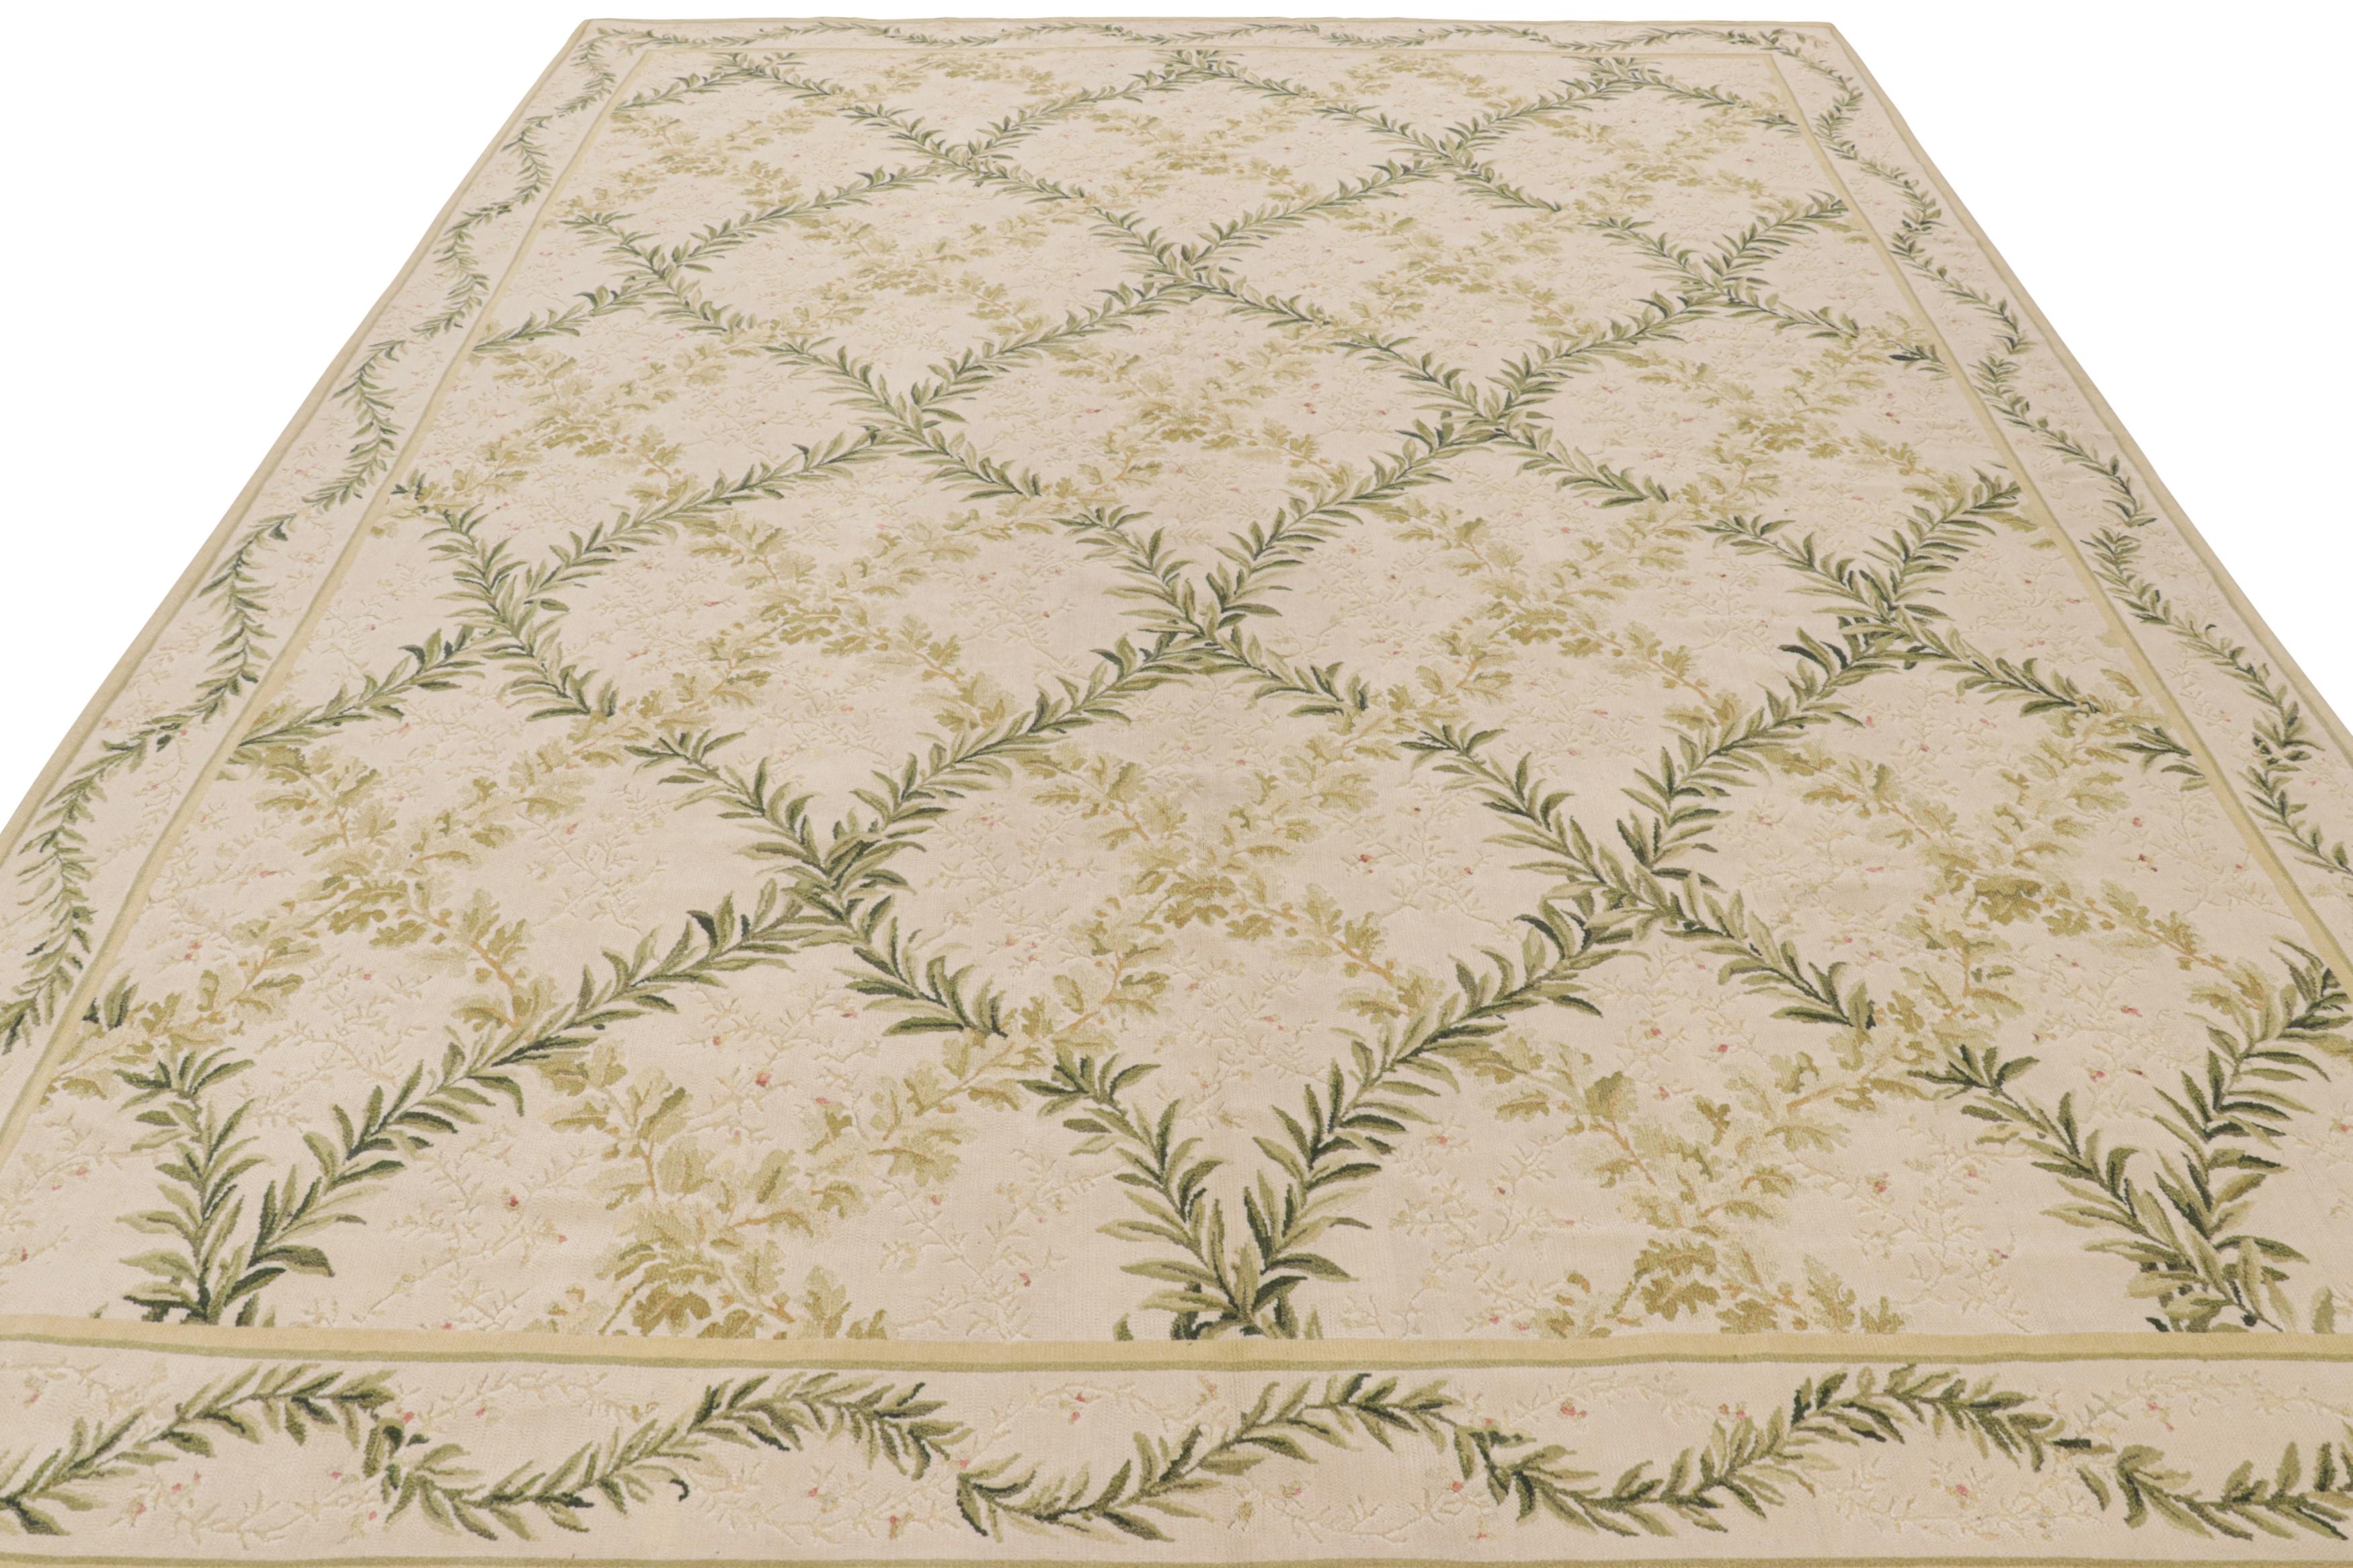 Hand-Knotted Rug & Kilim’s Tudor Style Flat Weave in Green and Cream Trellis Floral Patterns For Sale